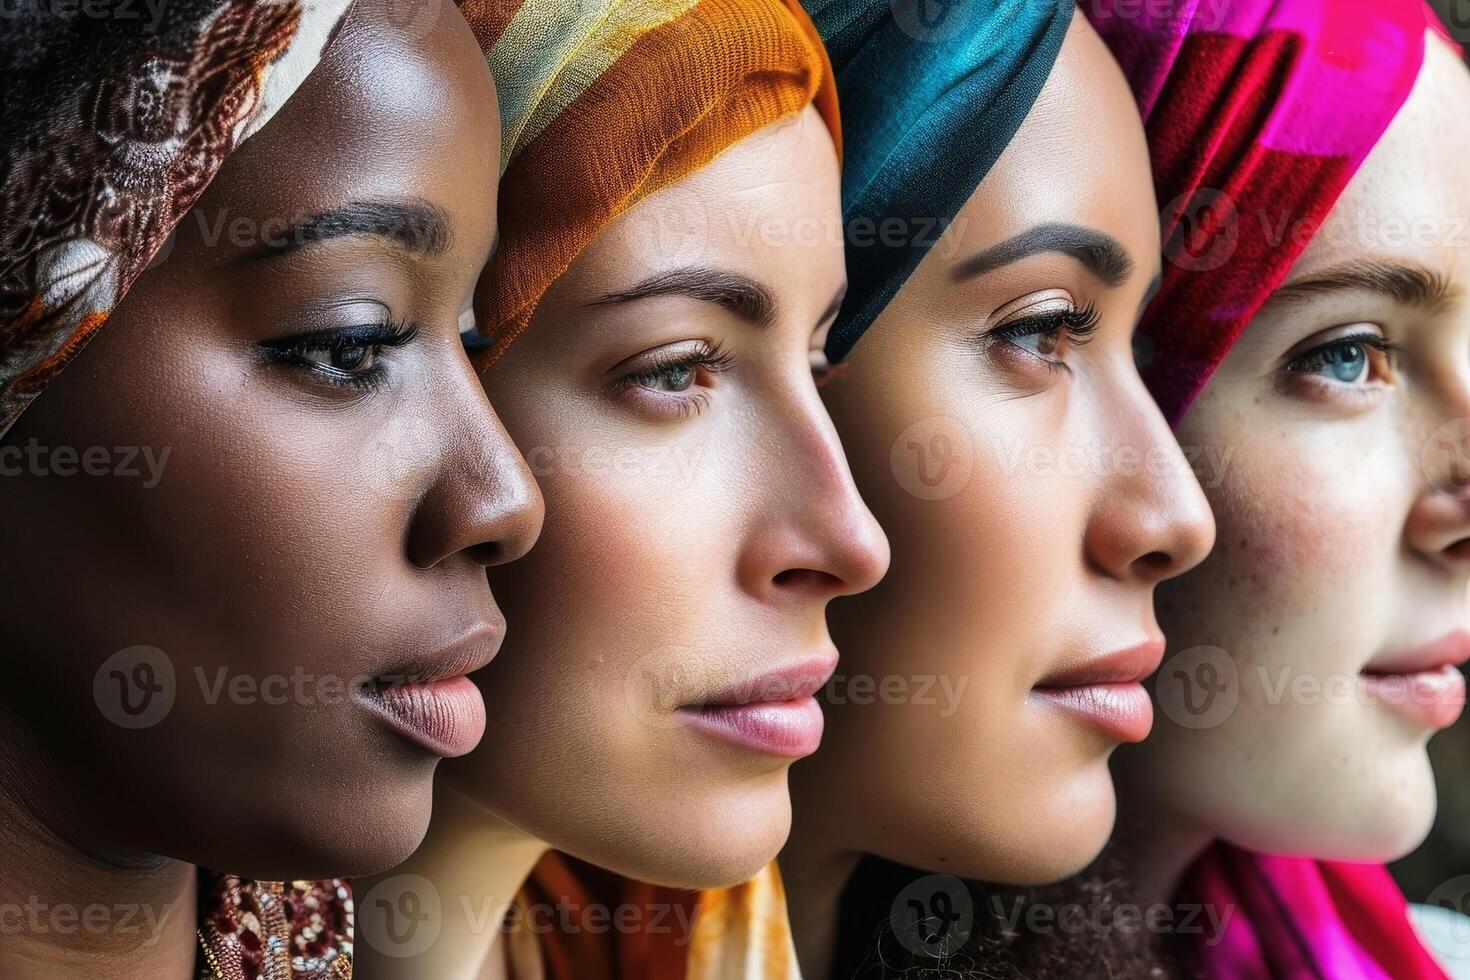 A collage of women showing ethnical diversity. photo